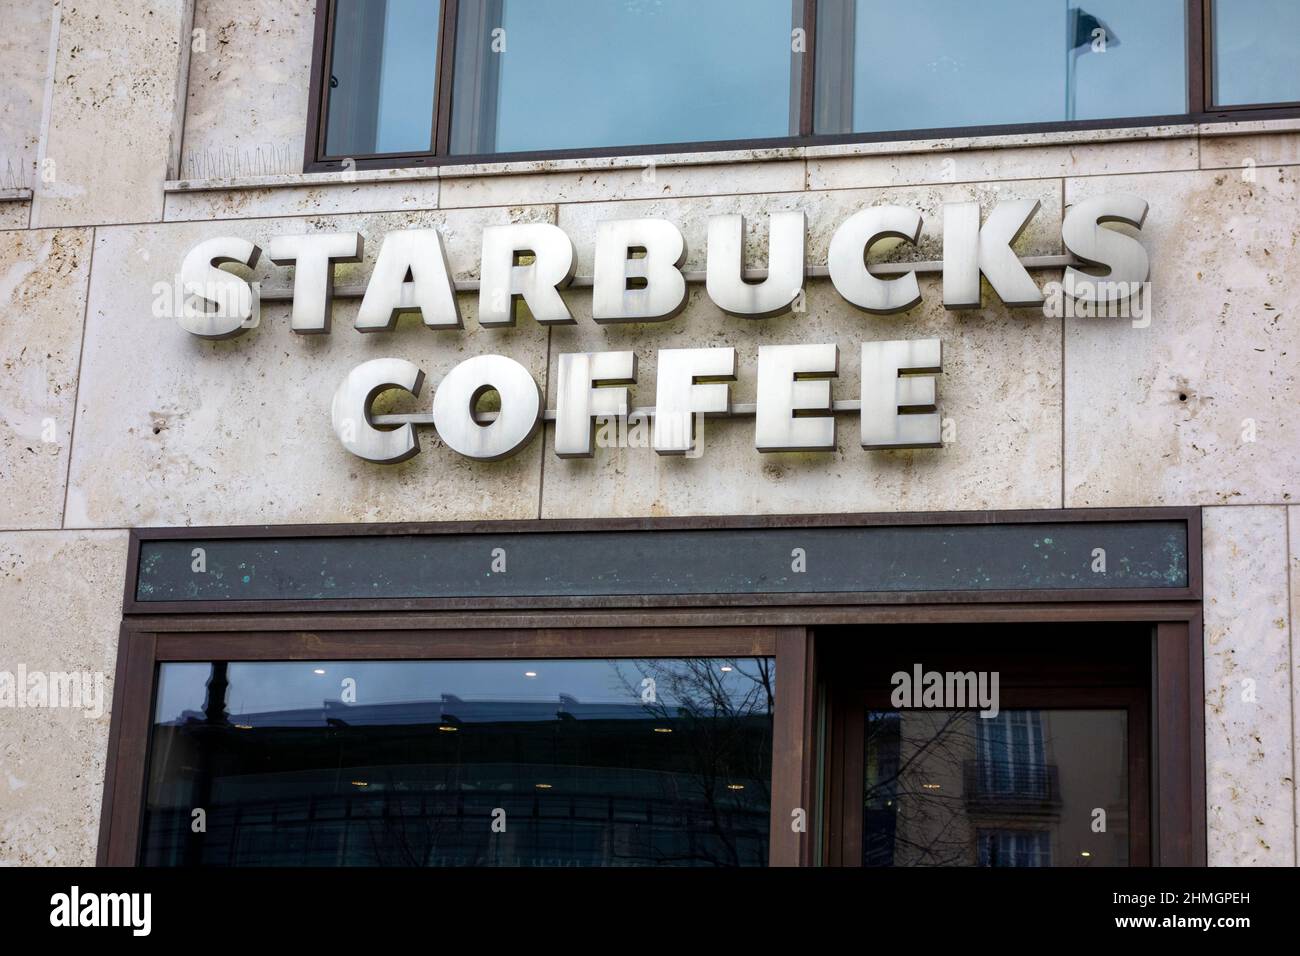 Berlin, Germany - Dec 25, 2017. Starbucks coffee sign. Starbucks Coffee is an American chain of coffee shops, founded in Seattle. Stock Photo